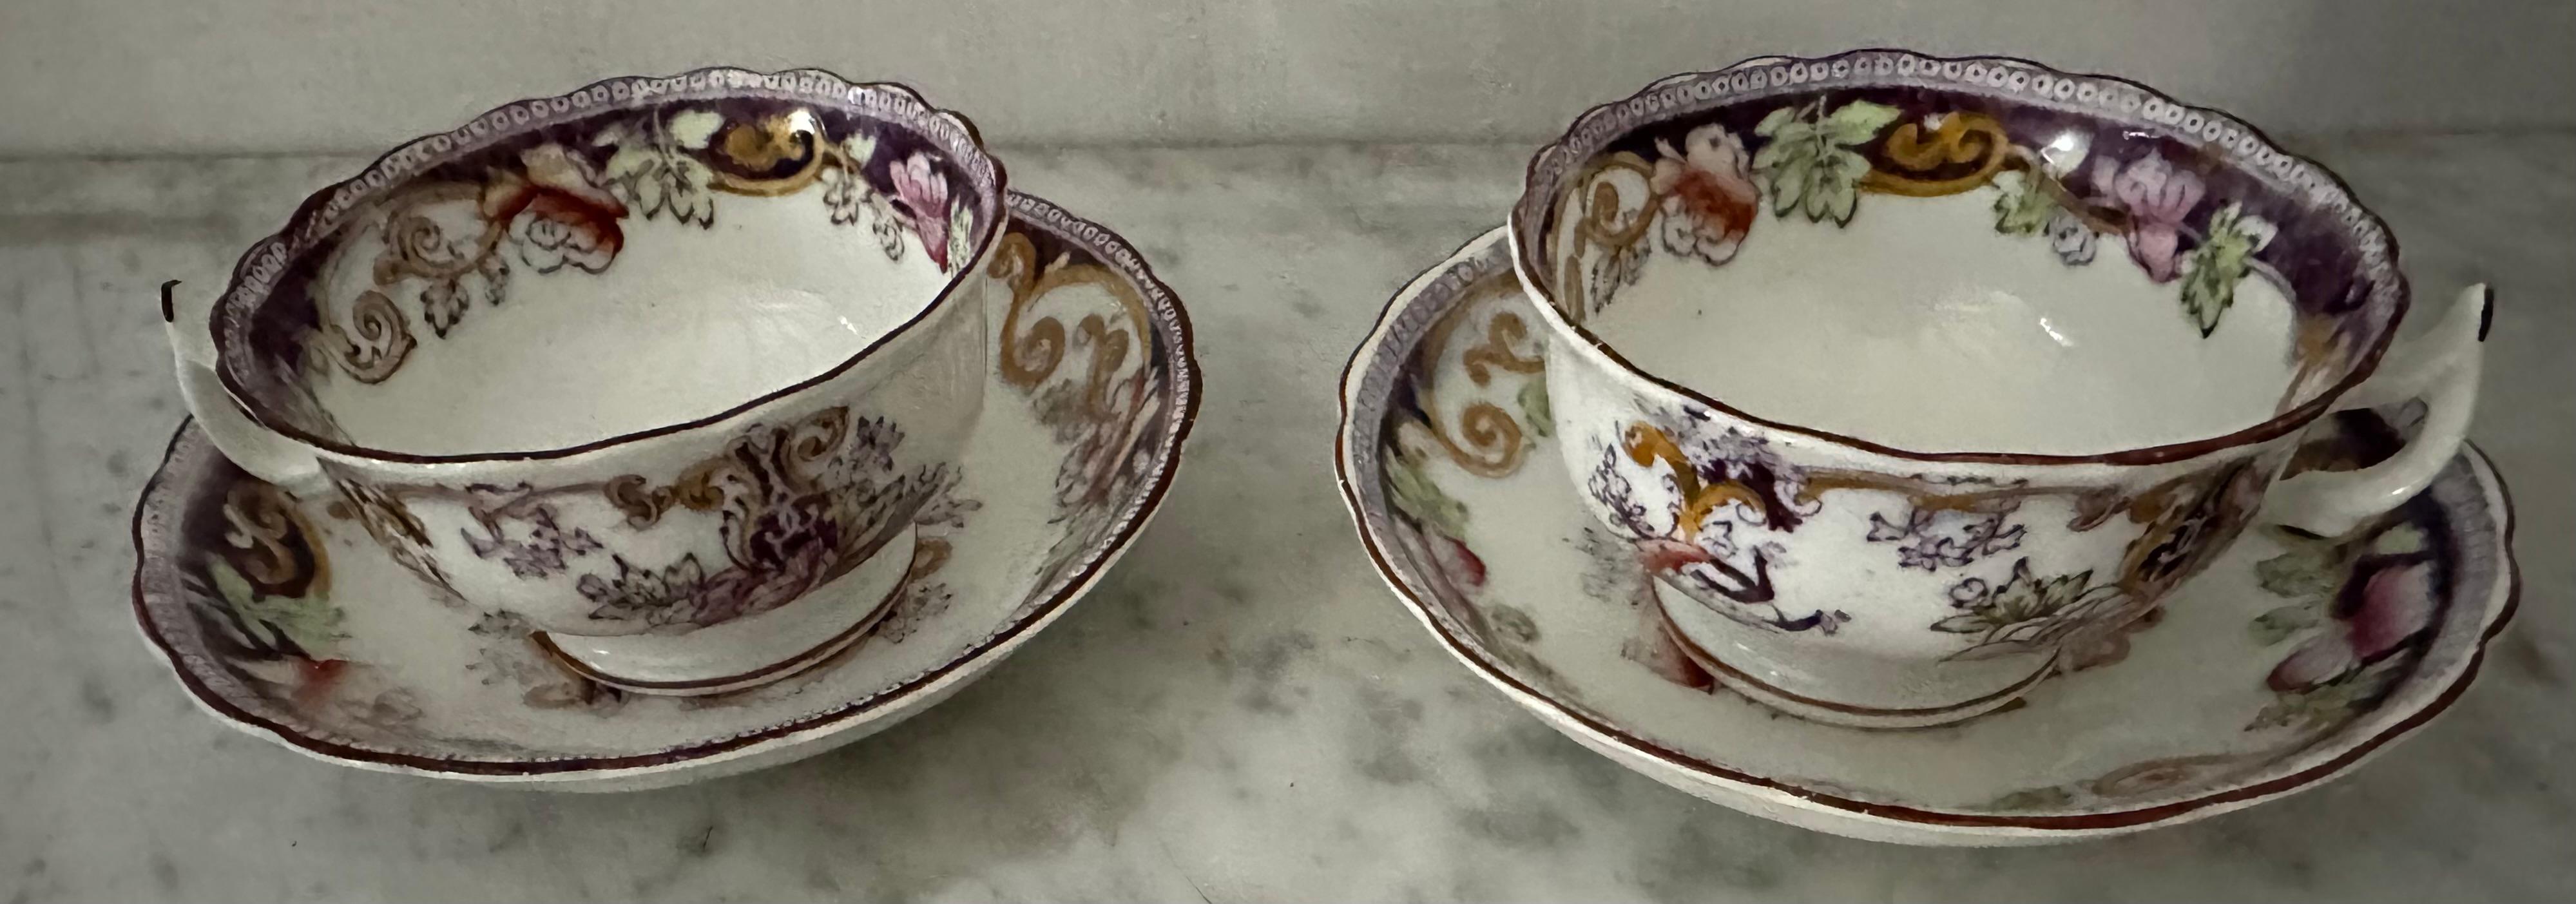 Pair of Antique 1890 English Bone China Tea Cup and Saucer Sets For Sale 2